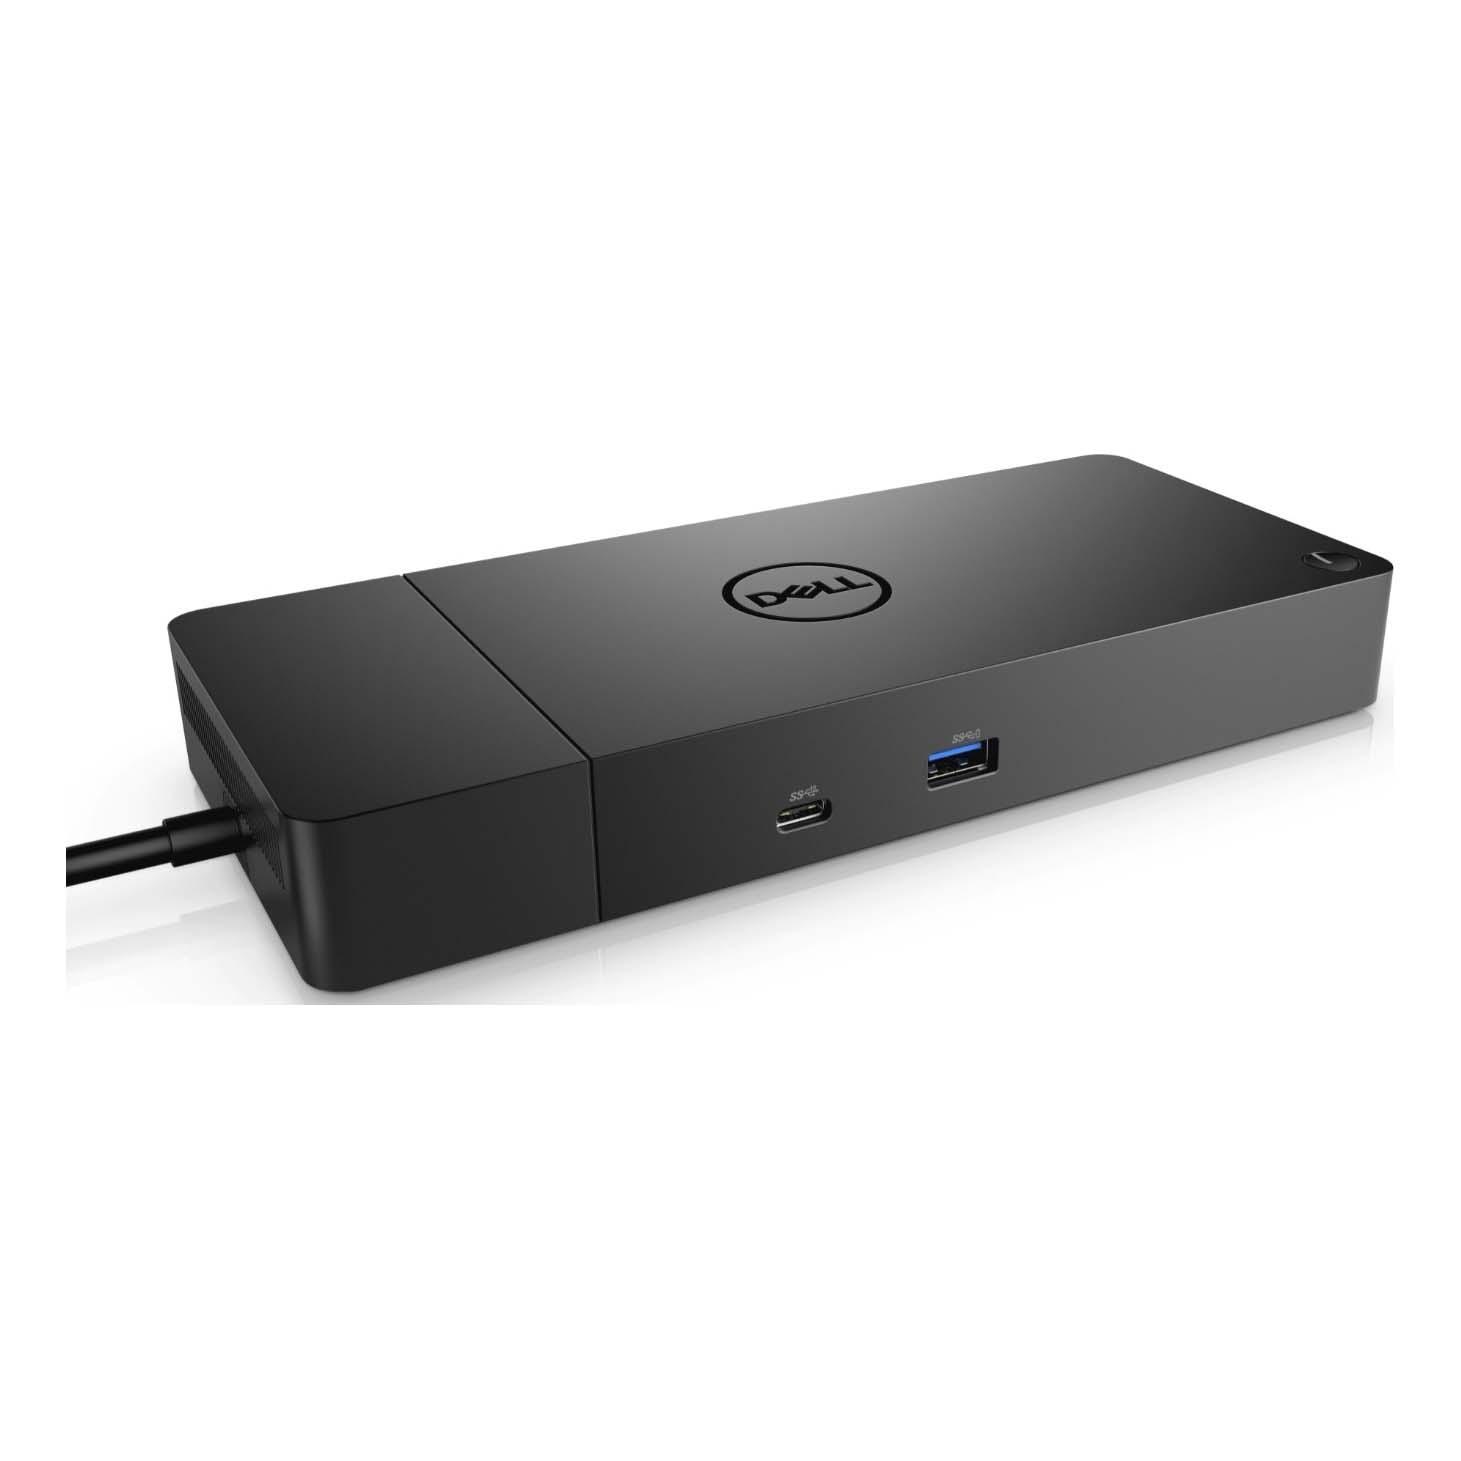 Док-станция Dell WD19S 180W USB Type-C, черный док станция dell wd19s wd19 4908 with 180w ac adapter